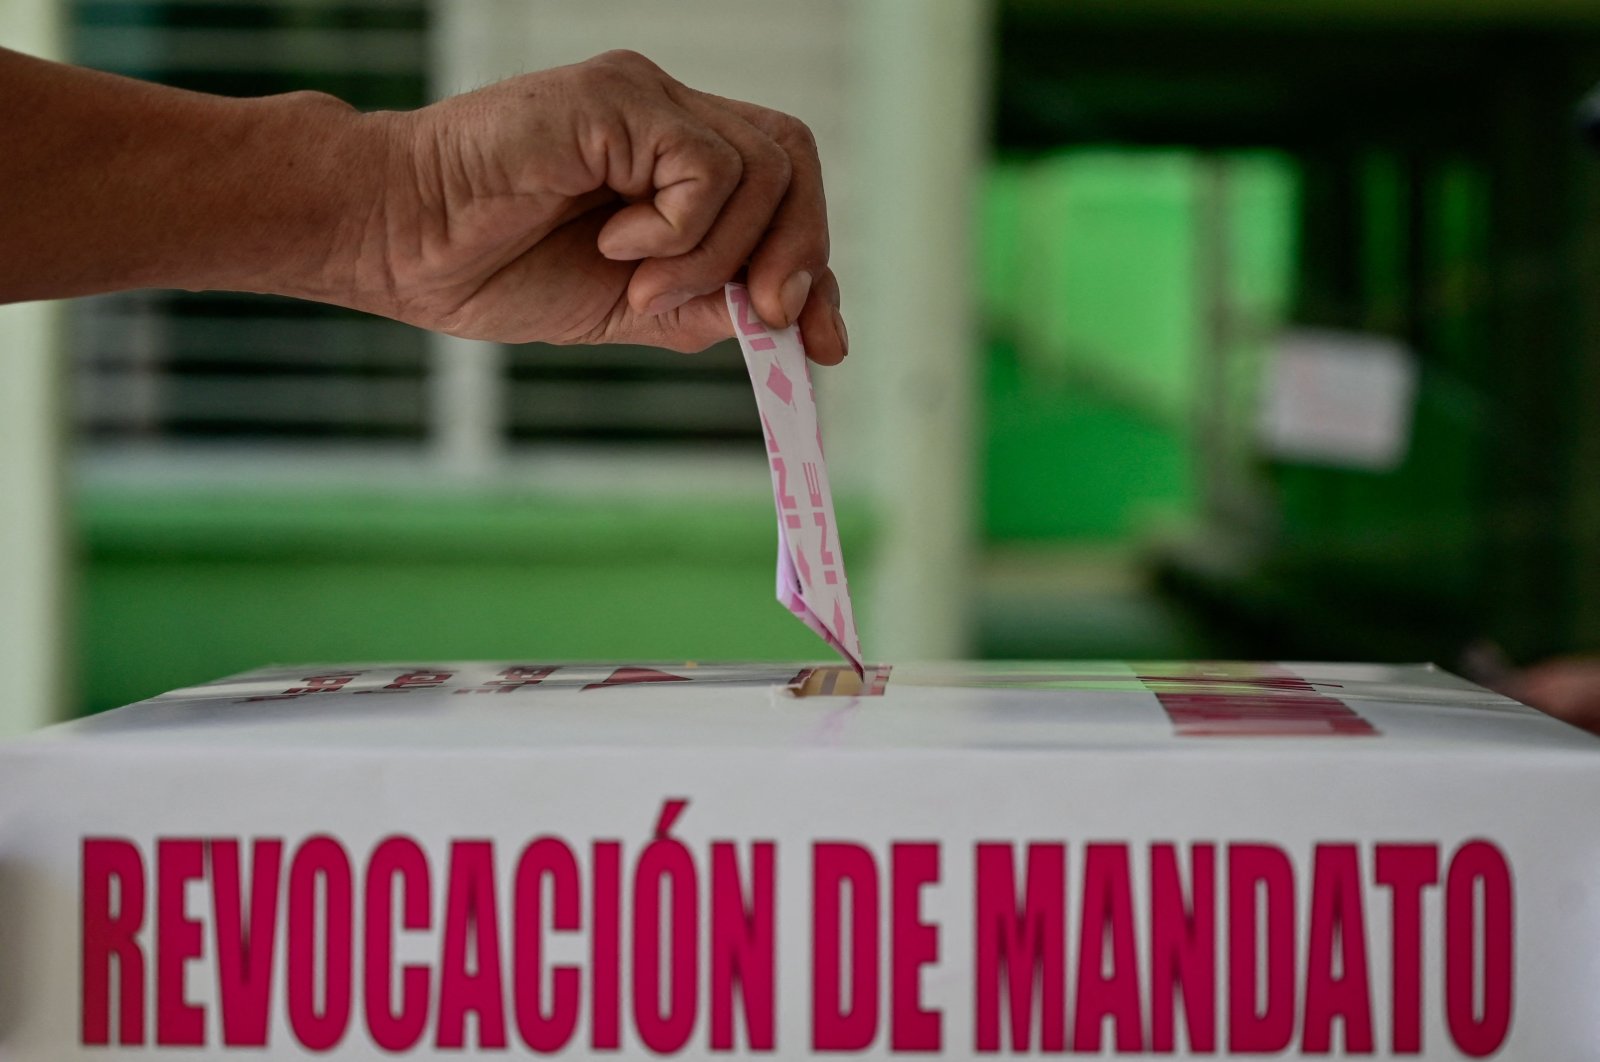 A man casts his vote at a polling station during a national referendum on the revocation of the mandate of Mexican President Andres Manuel Lopez Obrador, Mexico City, Mexico, April 10, 2022. (AFP Photo)